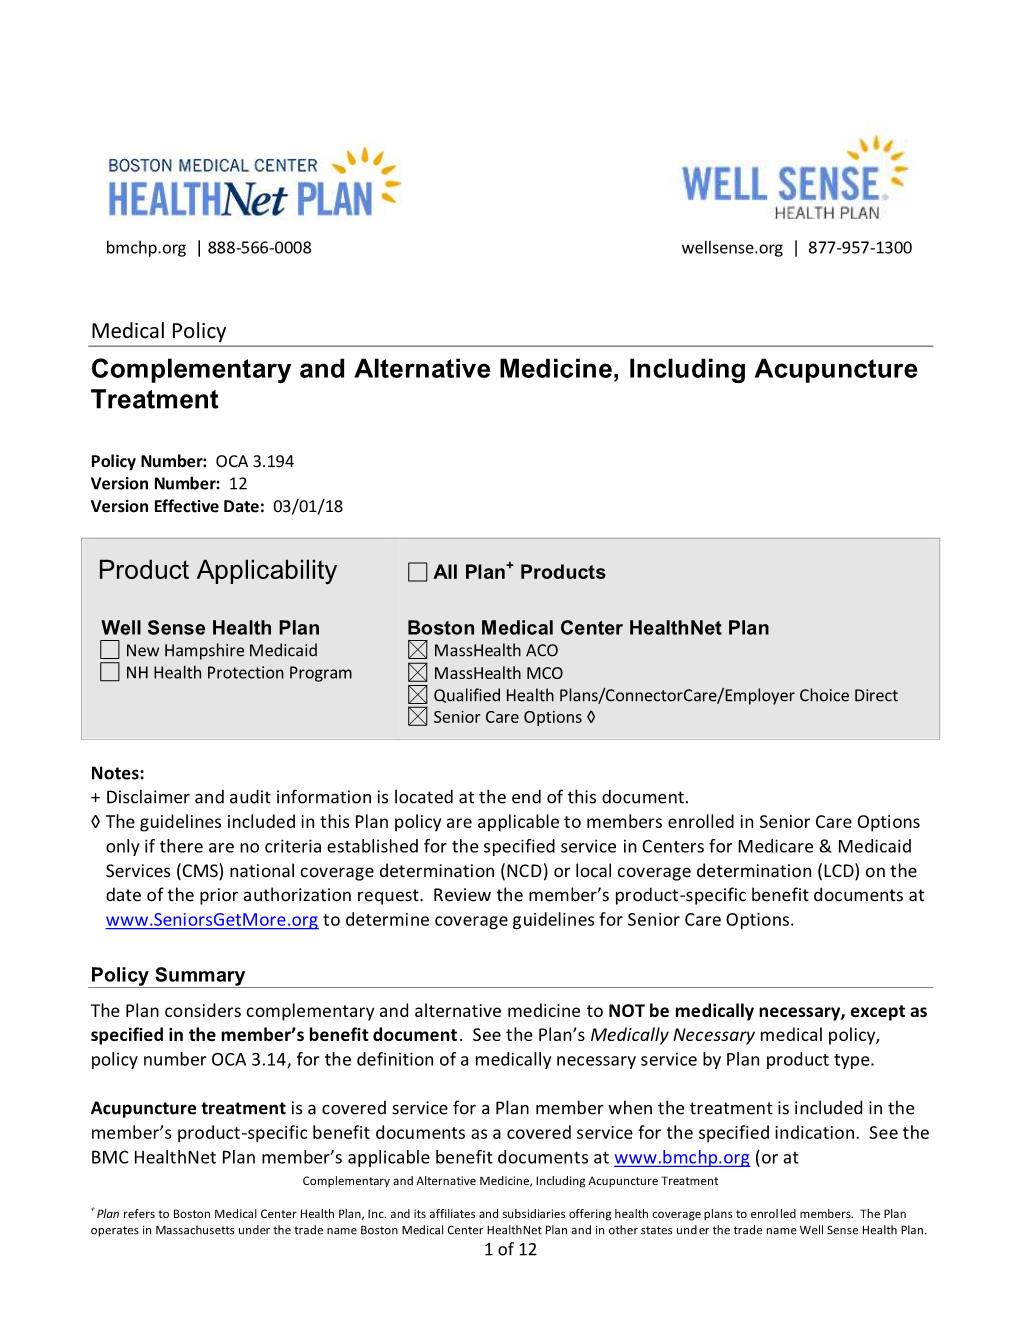 Complementary and Alternative Medicine, Including Acupuncture Treatment